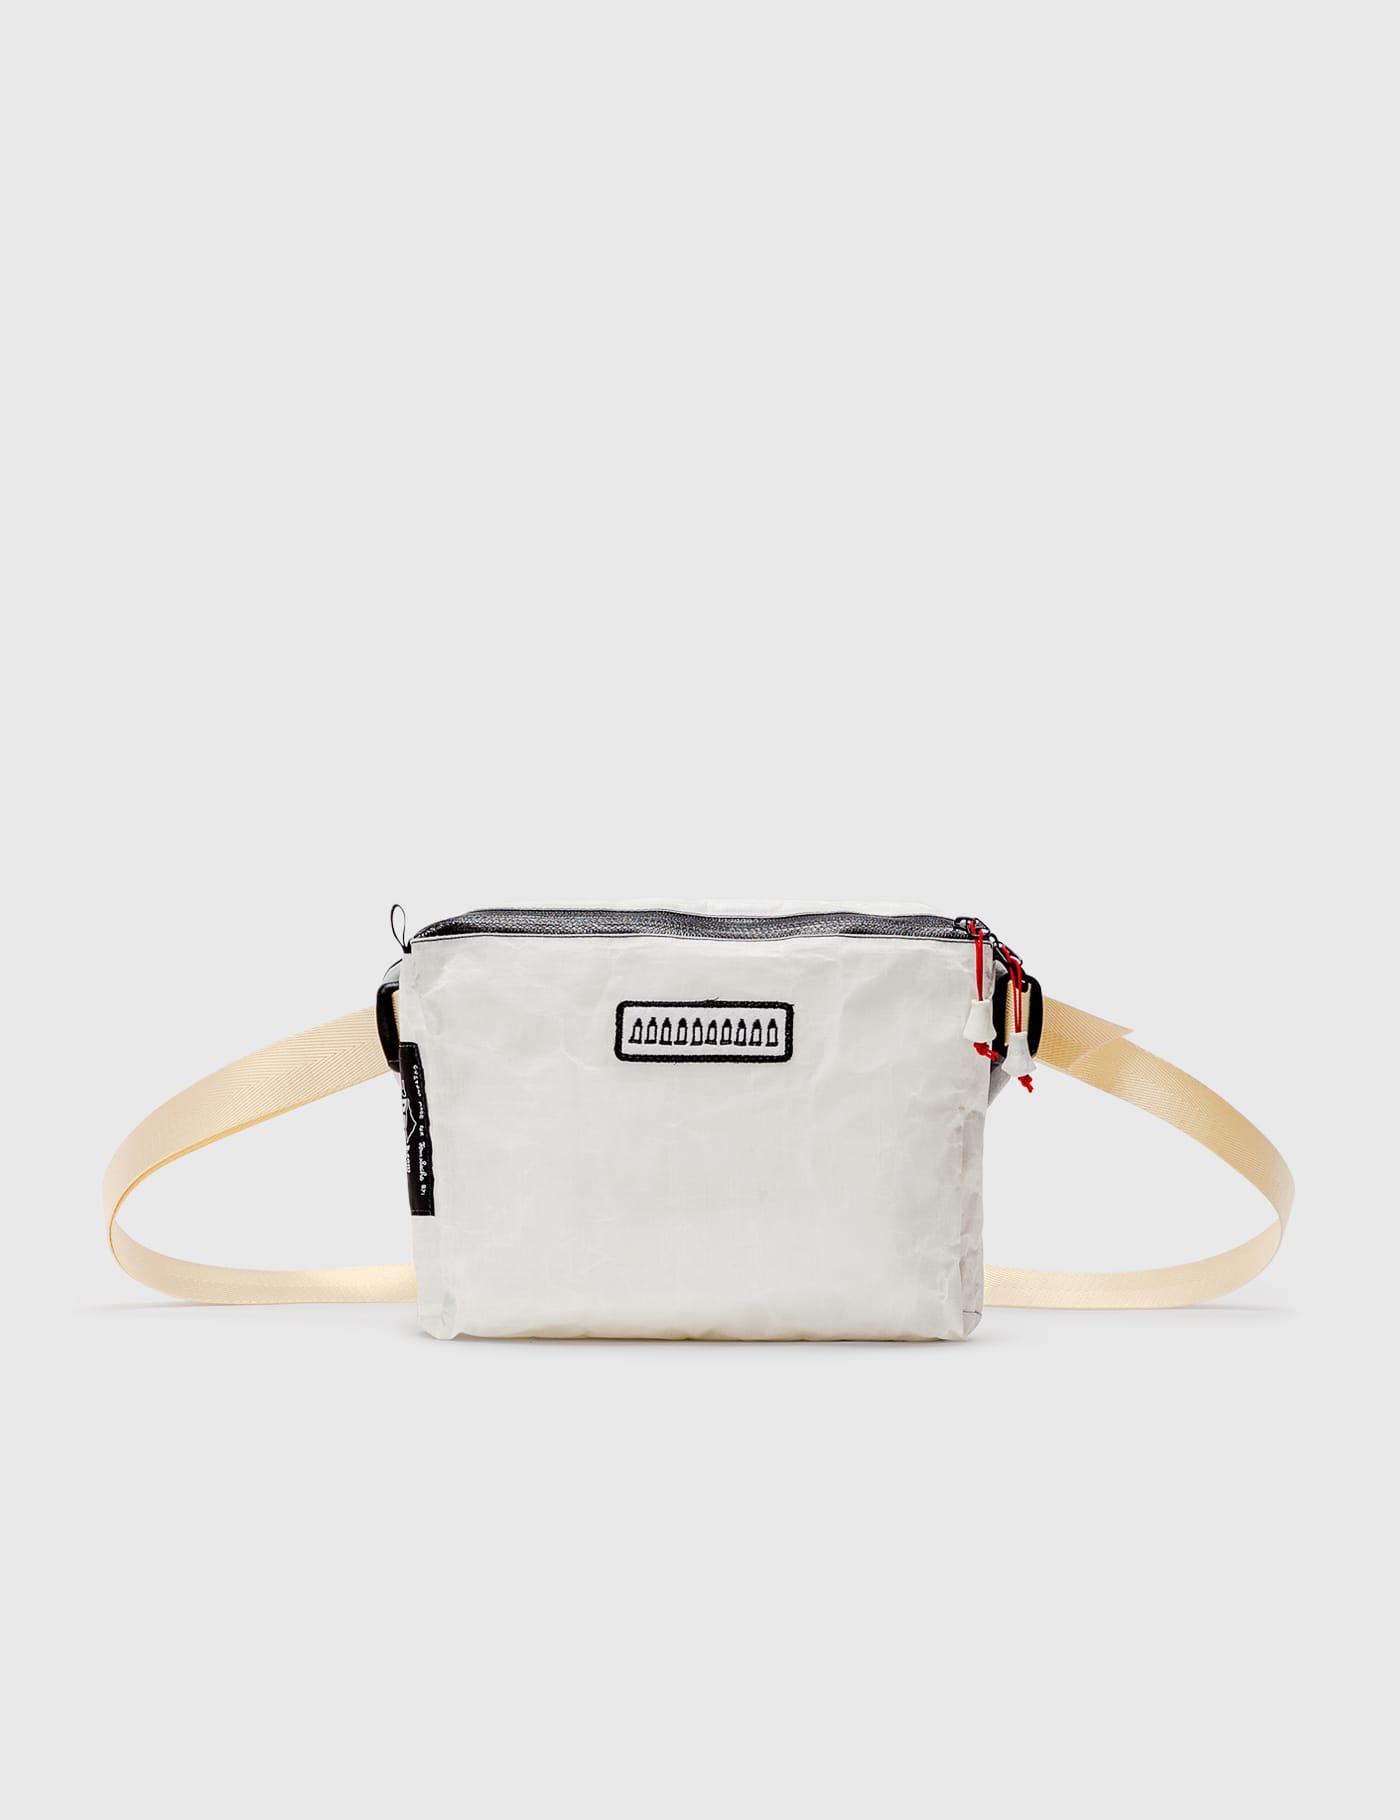 Tom Sachs - Tom Sachs Fanny Pack | HBX - Globally Curated Fashion 